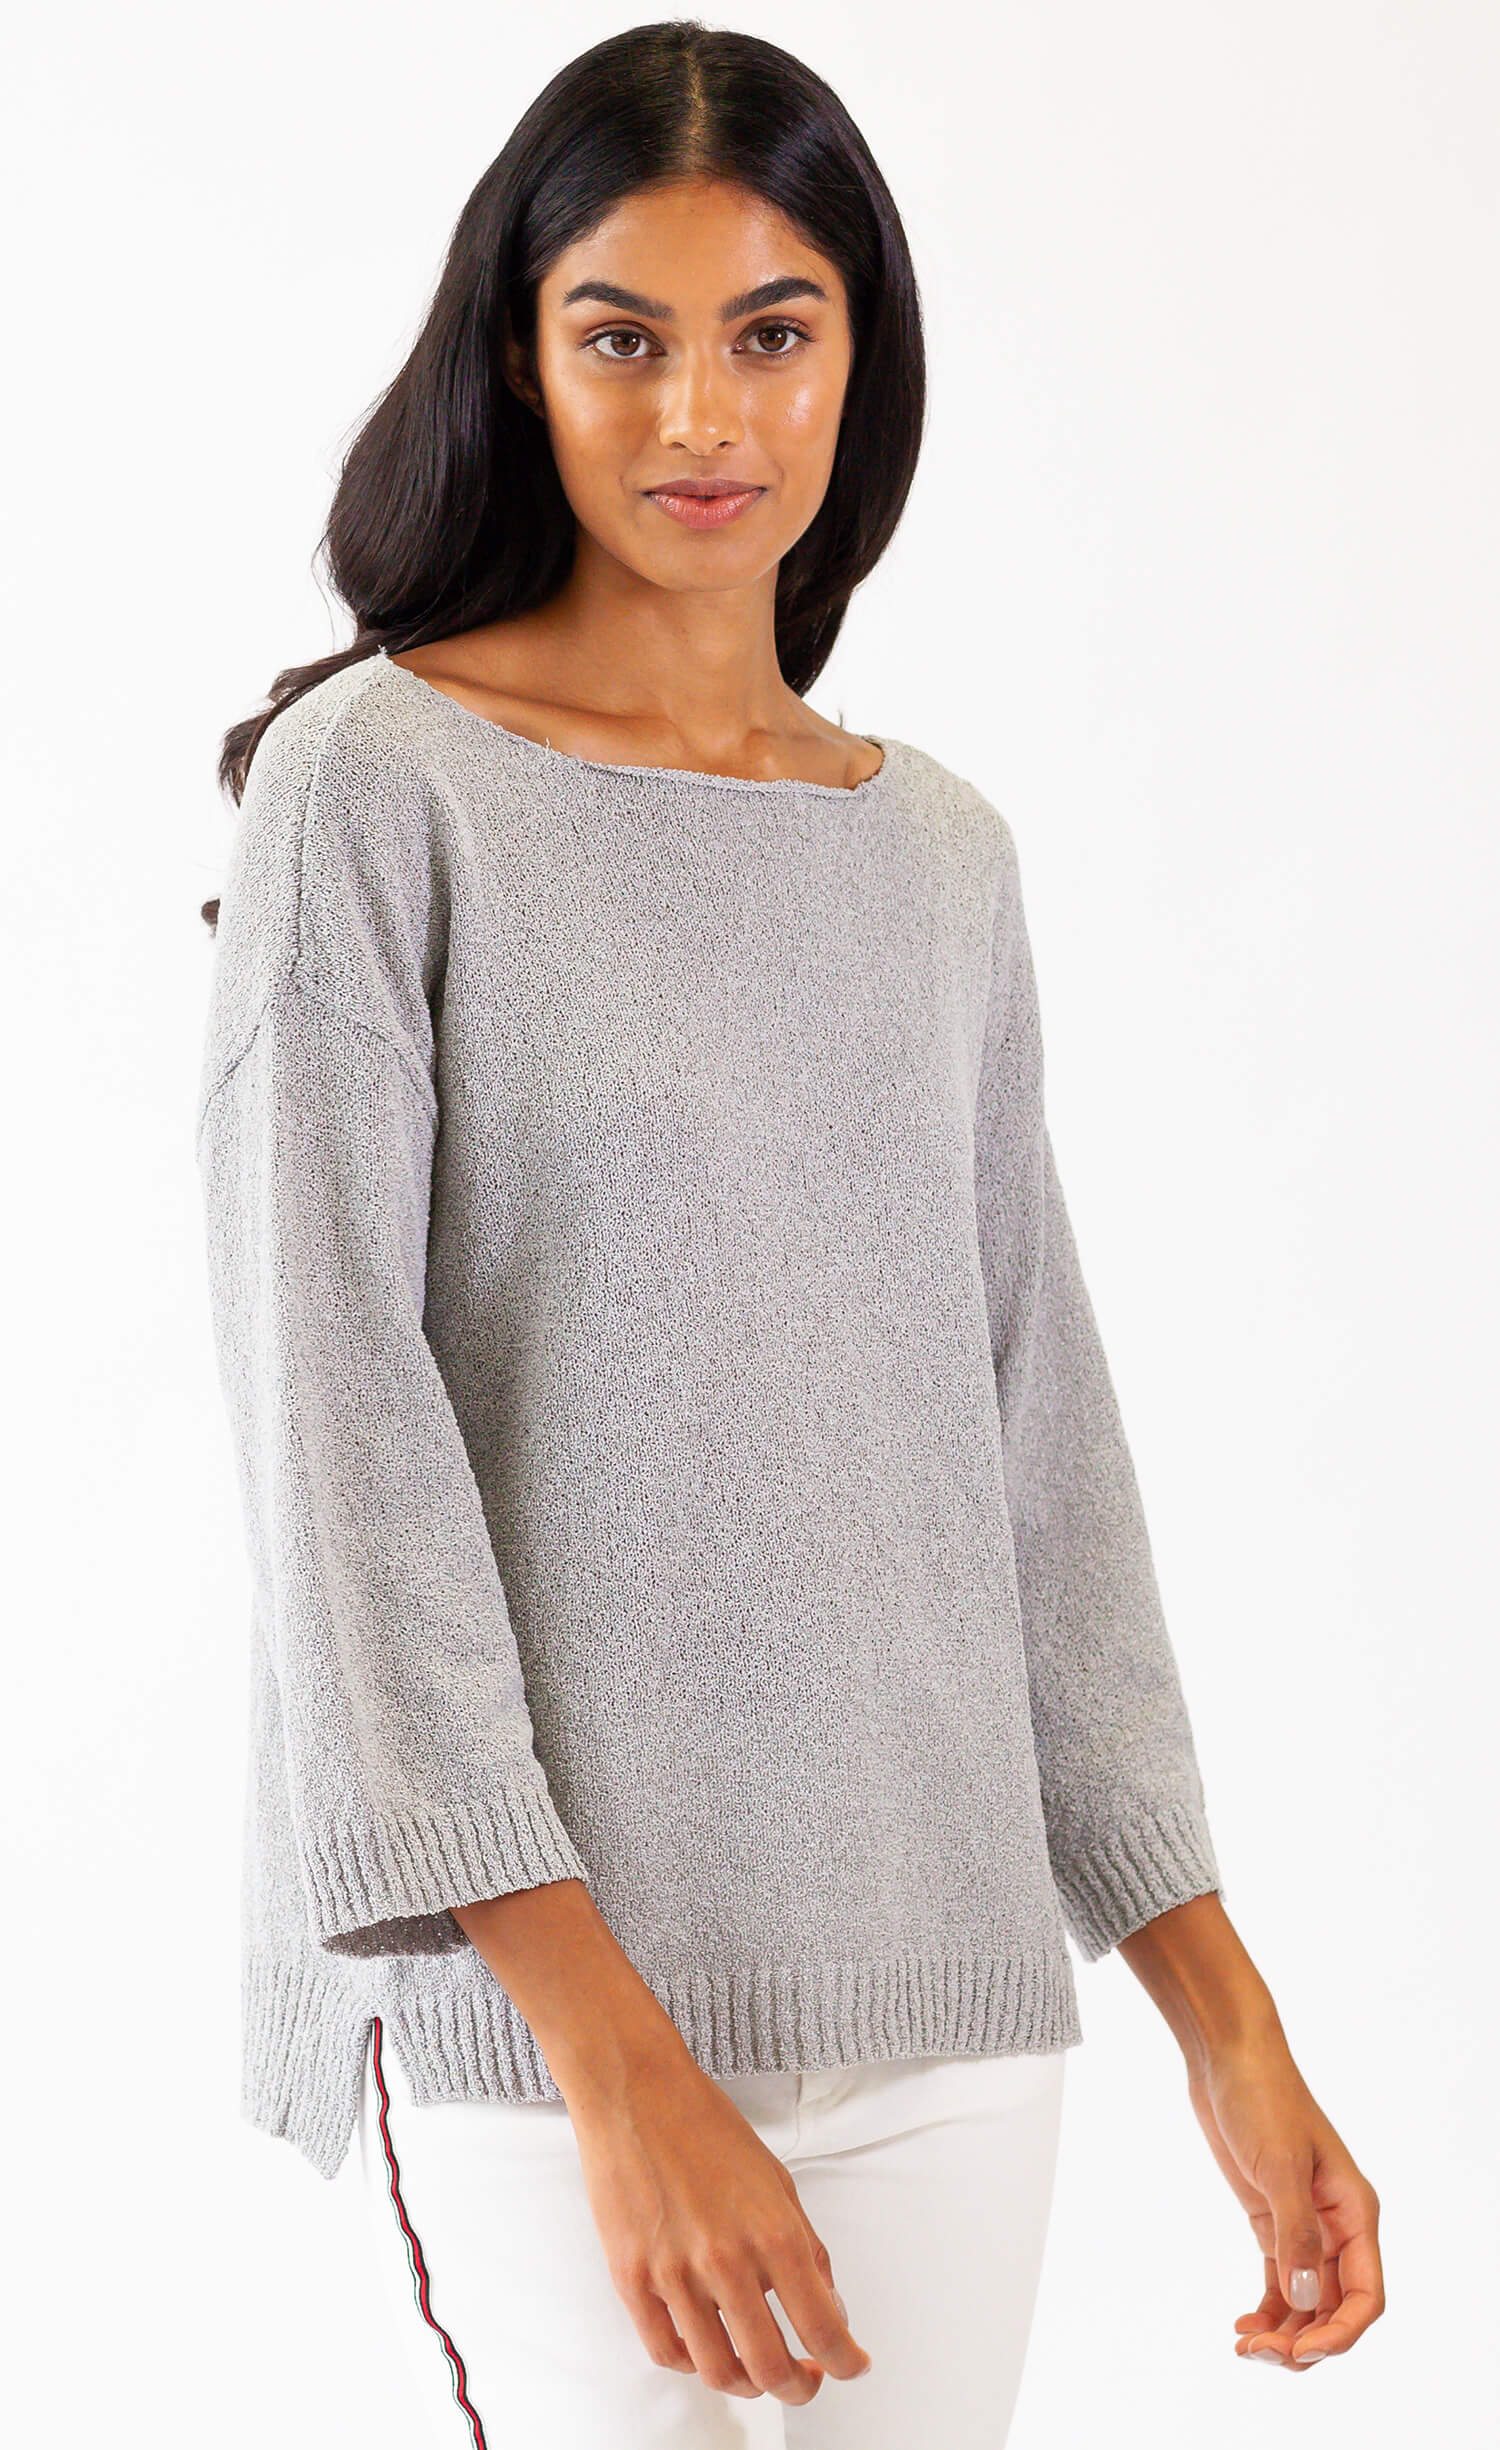 Save Tonight Sweater - Pink Martini Collection